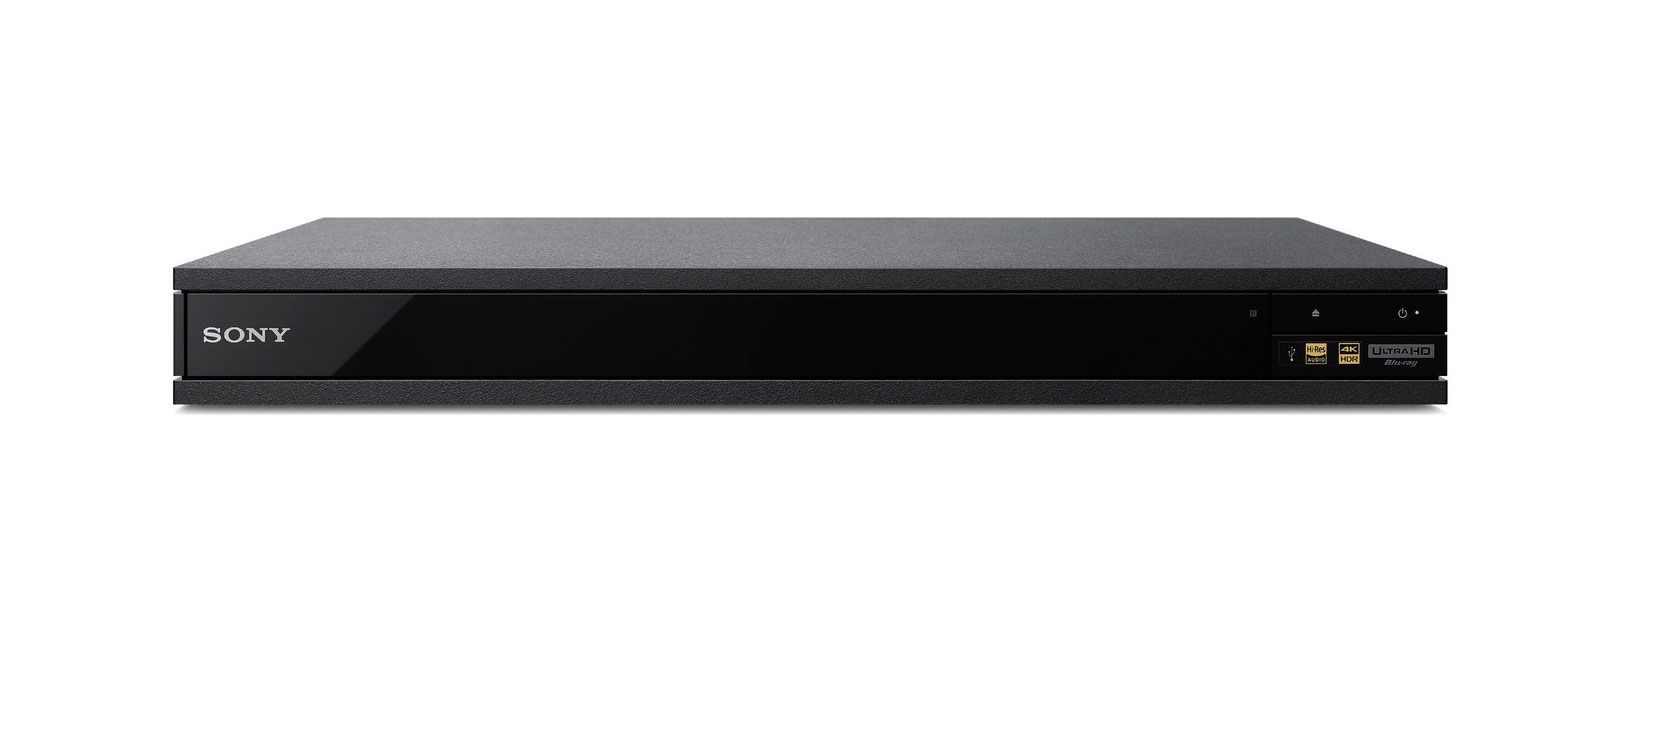 sony s jumps onboard the 4k blu ray bandwagon with ubp x800 image 1